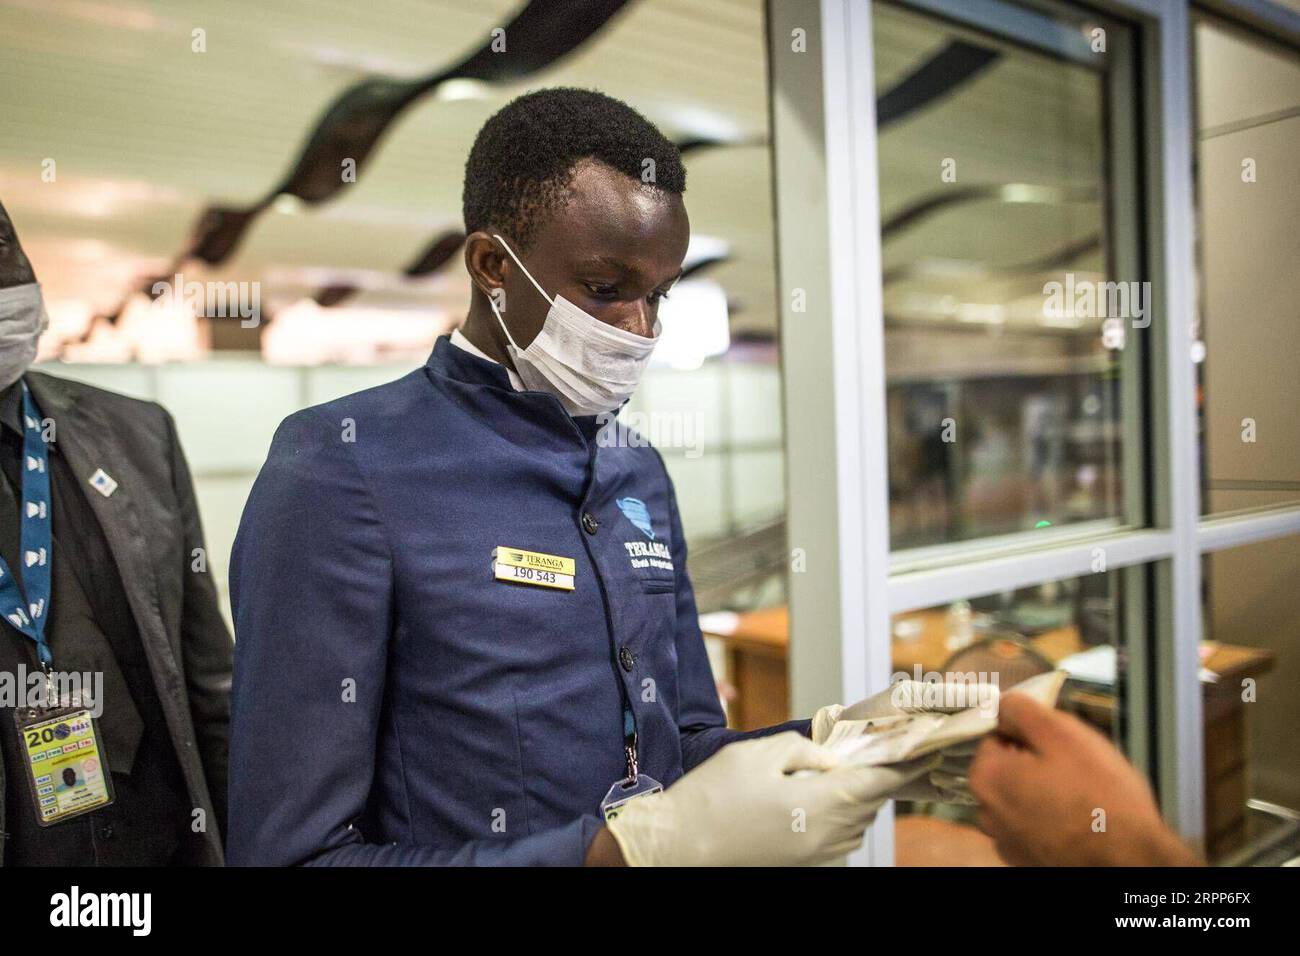 200312 -- DAKAR, March 12, 2020 Xinhua -- An airport employee wearing face mask checks passports at the entrance of the airport, in Dakar, Senegal, March 10, 2020. Senegalese Ministry of Health and Social Action confirmed the country s fifth case of the COVID-19 on Wednesday. In order to prevent more cases from entering Senegal, the authorities of Blaise Diagne International Airport, under the guideline of Senegalese Ministry of Health and Social Action, have intensified all the necessary measures to detect cases of the novel coronavirus. Photo by Eddy Peters/Xinhua SENEGAL-AIRPORT-MEASURES-CO Stock Photo